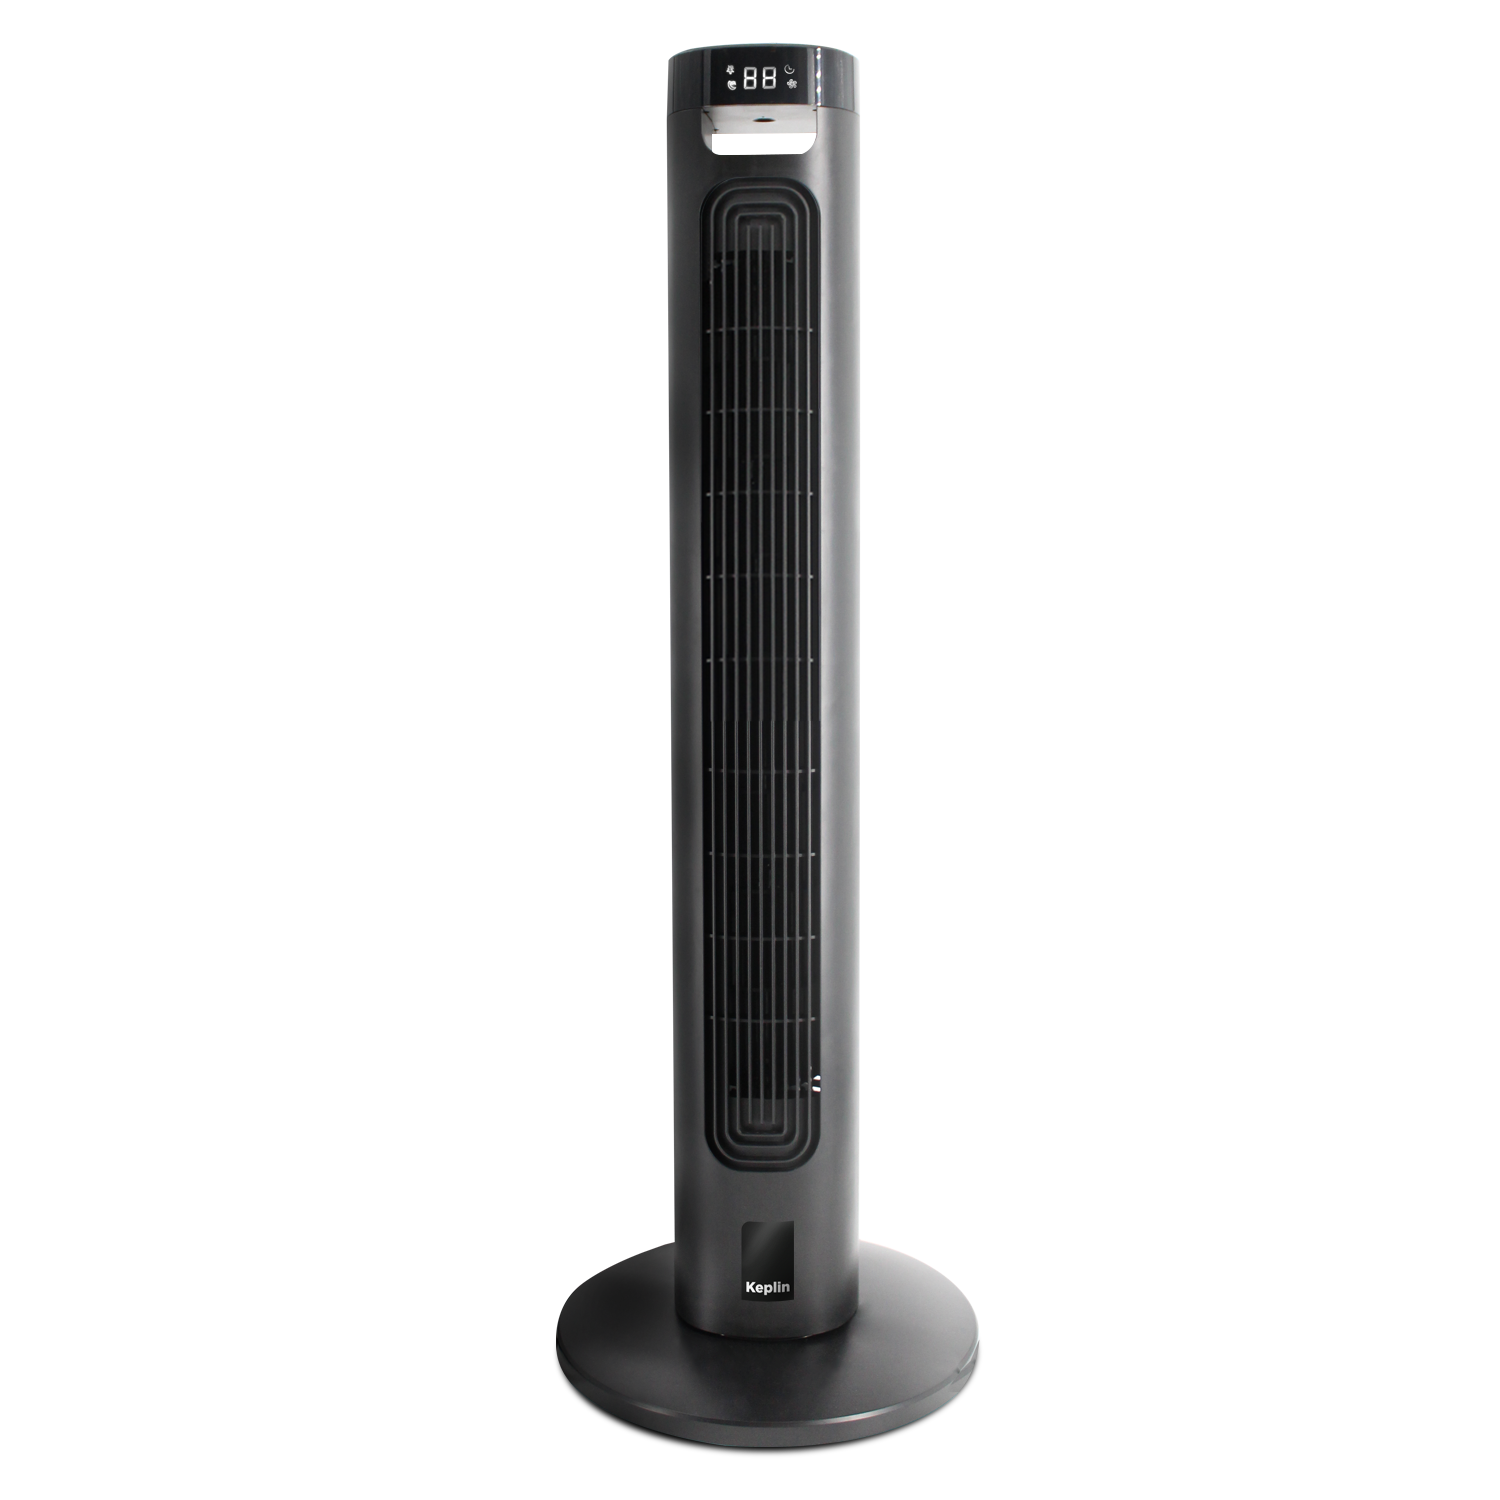 Cooling 36-inch Tall Tower Fan with Remote Control - 3 Speed Setting with LED Display